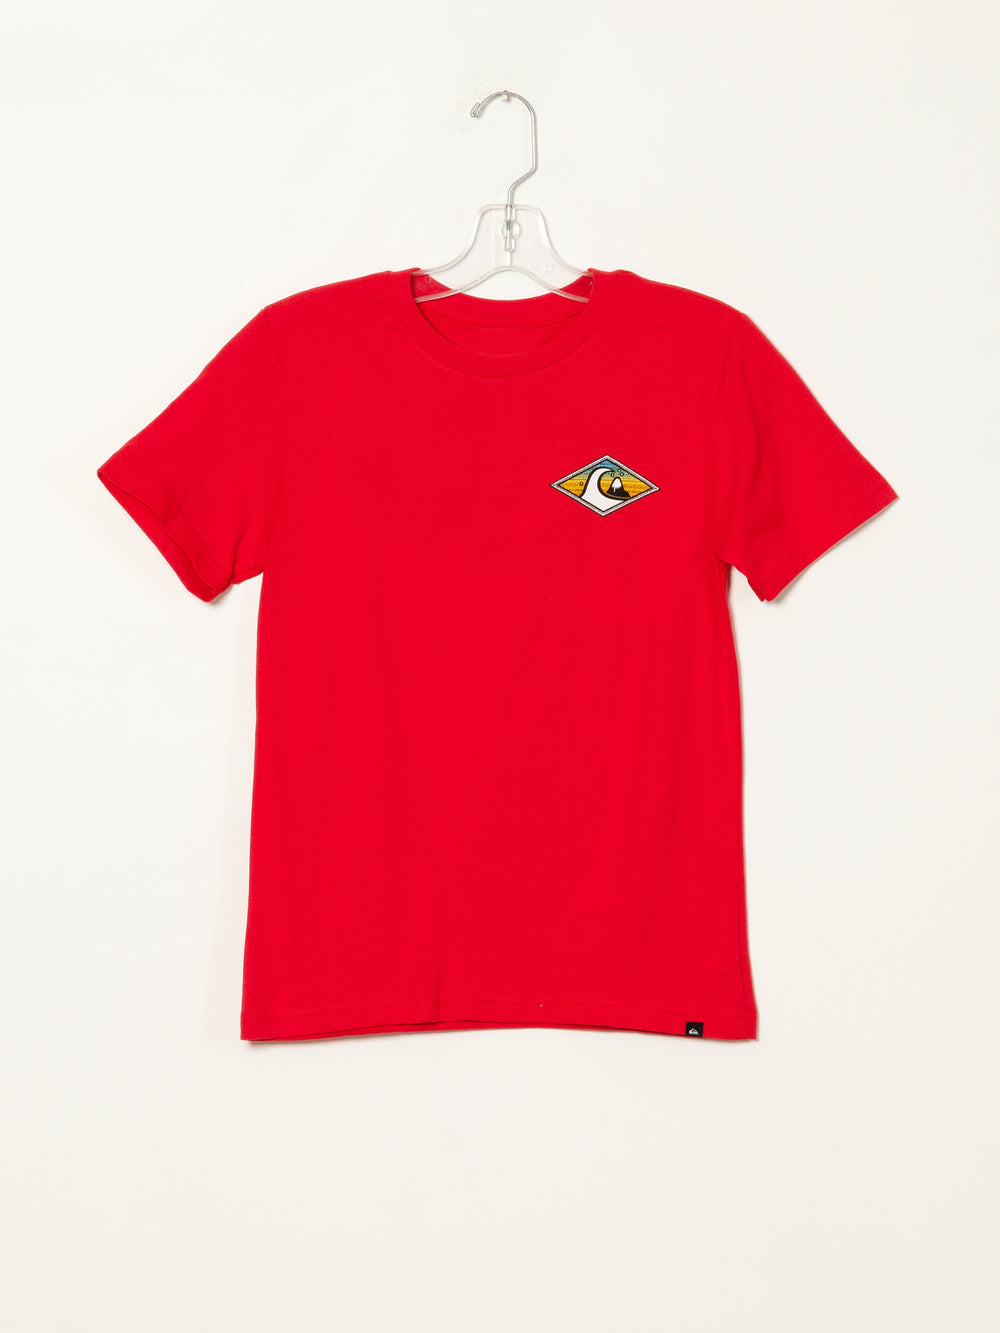 QUIKSILVER YOUTH BOYS INSIDE OUT T-SHIRT - CLEARANCE